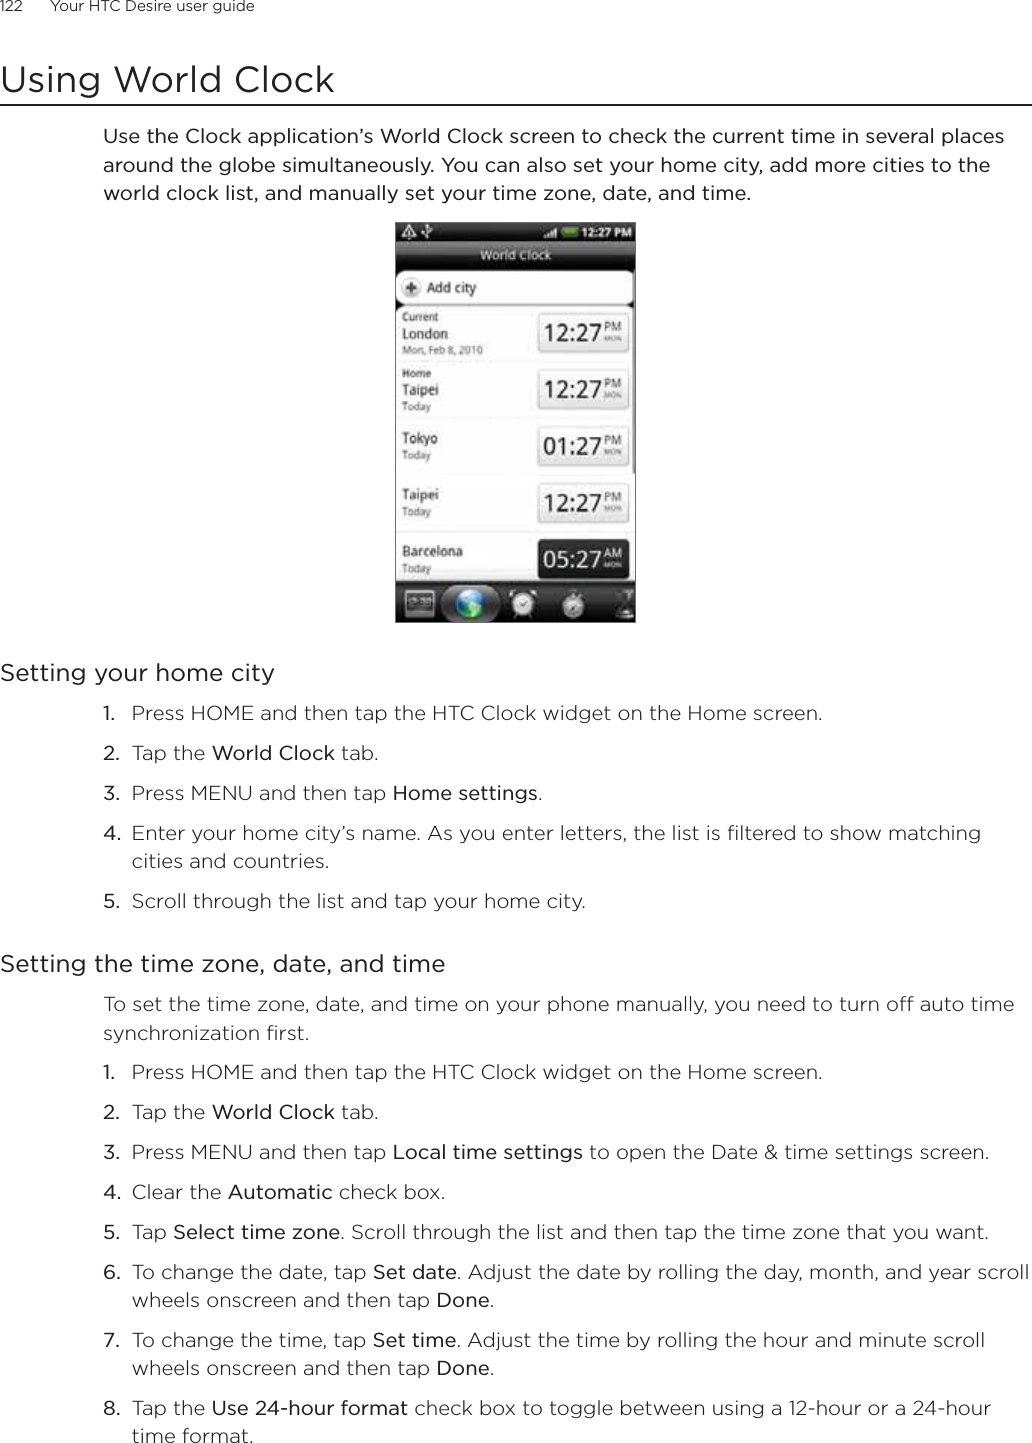 122      Your HTC Desire user guide      Using World ClockUse the Clock application’s World Clock screen to check the current time in several places around the globe simultaneously. You can also set your home city, add more cities to the world clock list, and manually set your time zone, date, and time.Setting your home cityPress HOME and then tap the HTC Clock widget on the Home screen.Tap the World Clock tab.Press MENU and then tap Home settings.Enter your home city’s name. As you enter letters, the list is filtered to show matching cities and countries.Scroll through the list and tap your home city.Setting the time zone, date, and timeTo set the time zone, date, and time on your phone manually, you need to turn off auto time synchronization first.Press HOME and then tap the HTC Clock widget on the Home screen.Tap the World Clock tab.Press MENU and then tap Local time settings to open the Date &amp; time settings screen.Clear the Automatic check box.Tap Select time zone. Scroll through the list and then tap the time zone that you want.To change the date, tap Set date. Adjust the date by rolling the day, month, and year scroll wheels onscreen and then tap Done.To change the time, tap Set time. Adjust the time by rolling the hour and minute scroll wheels onscreen and then tap Done.Tap the Use 24-hour format check box to toggle between using a 12-hour or a 24-hour time format.1.2.3.4.5.1.2.3.4.5.6.7.8.